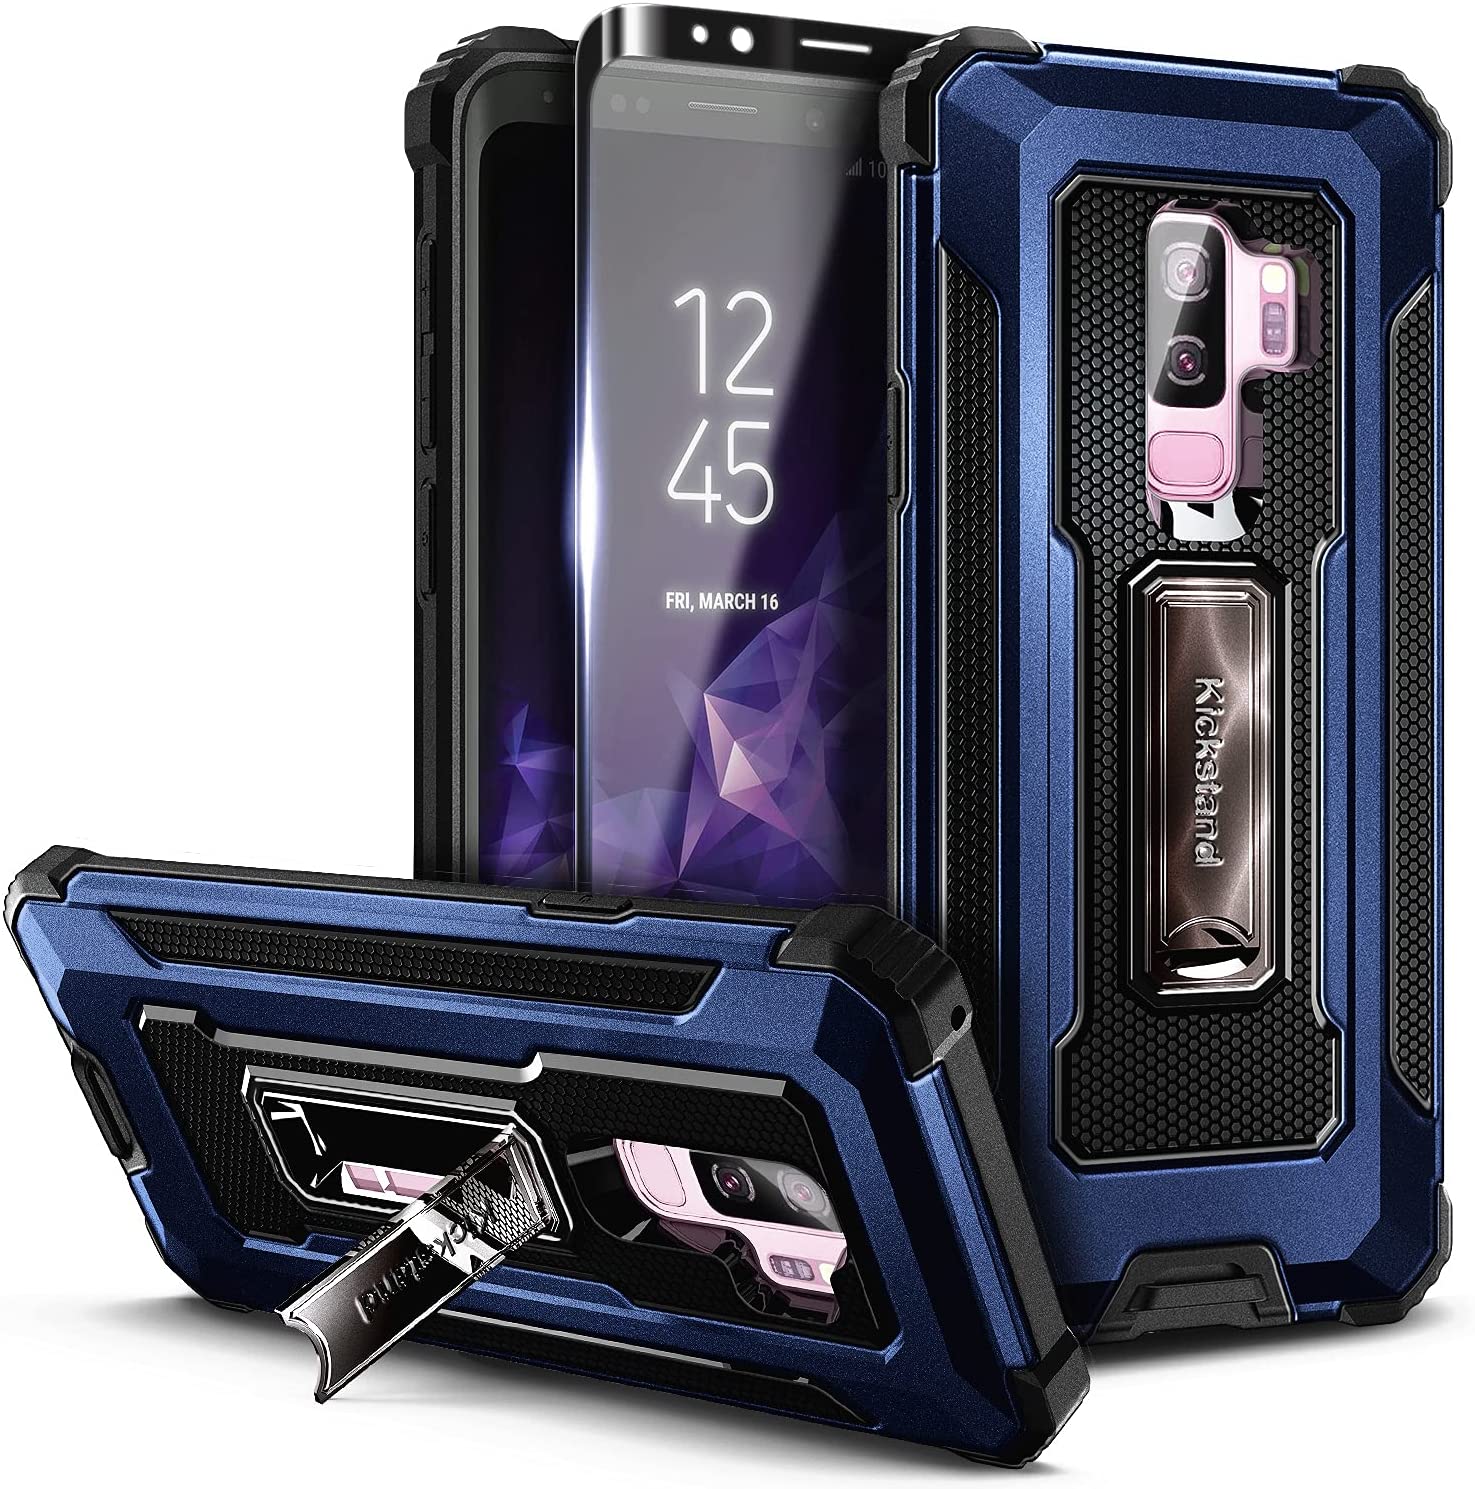 Nagebee Case for Samsung Galaxy S9 Plus with Screen Protector (Soft Full Coverage), Full-Body Armor Hybrid [Military Grade] Shockproof Built-in Kickstand Heavy Duty Durable Case (Blue) - image 1 of 6